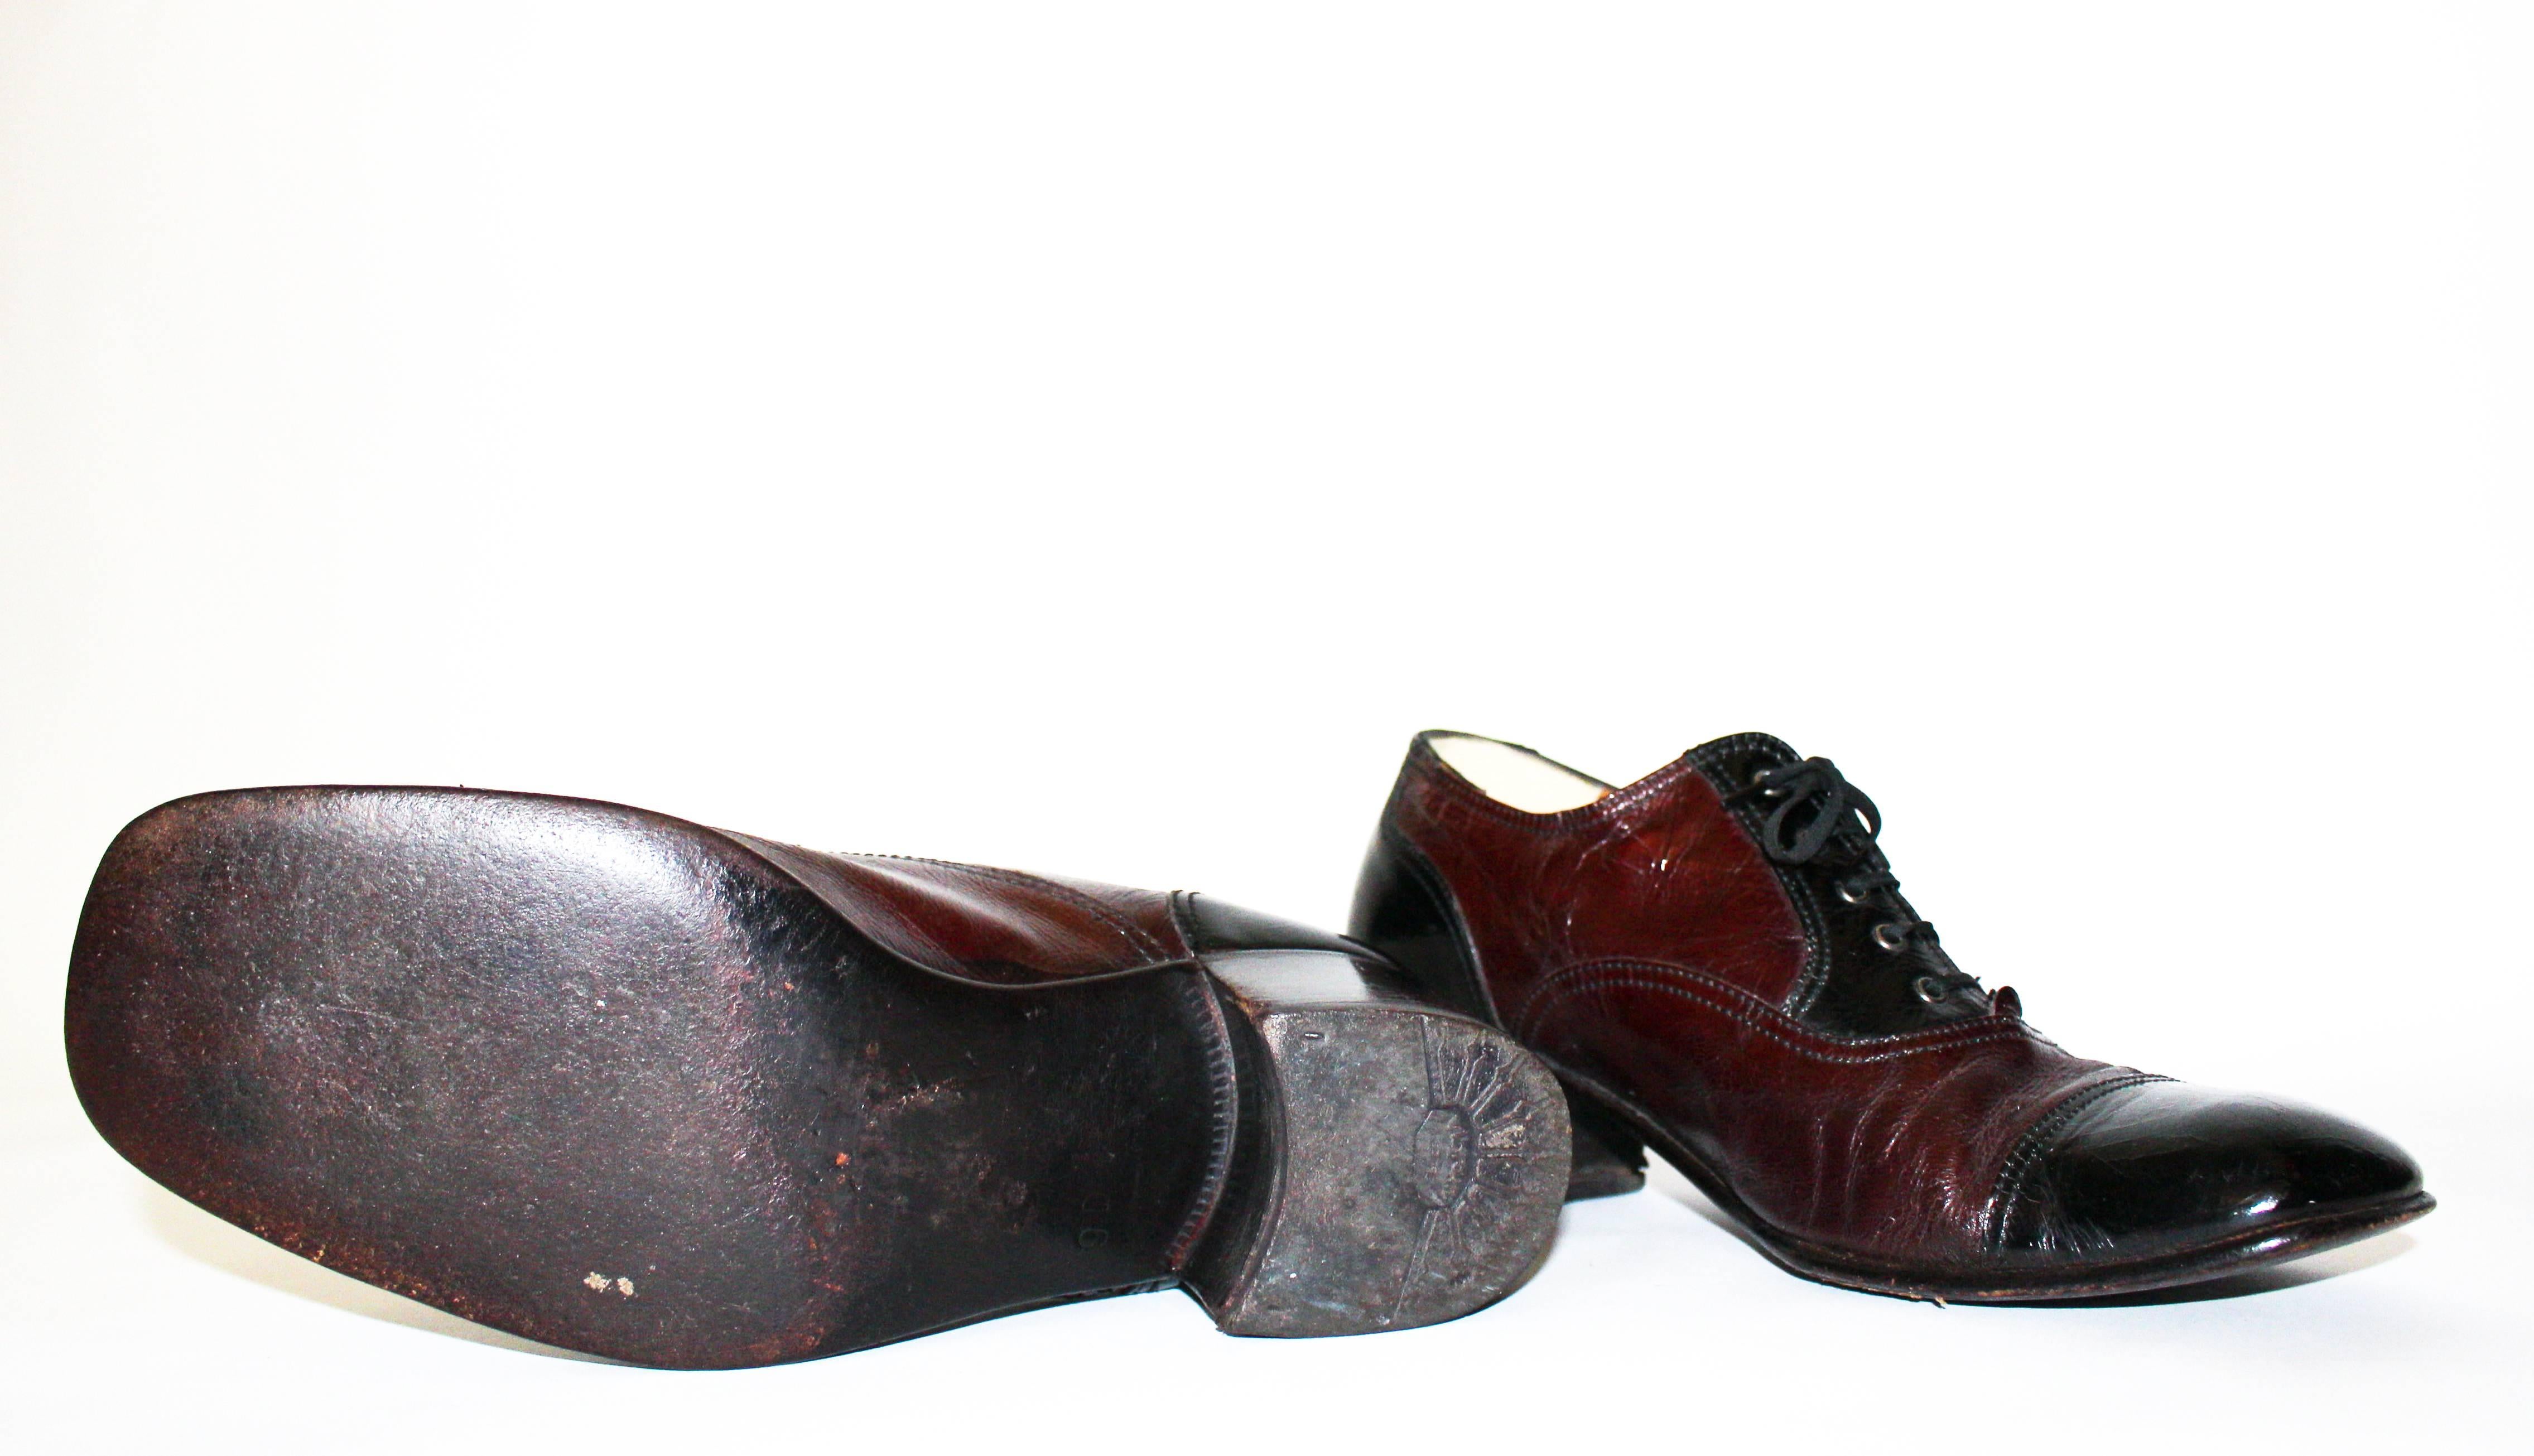 70s Black and Cordovan Cap Toe Leather Shoes. Leather soles. Original laces

Heel hight - 2"
Insole - 11"
Palm of the foot - 3 3/4"